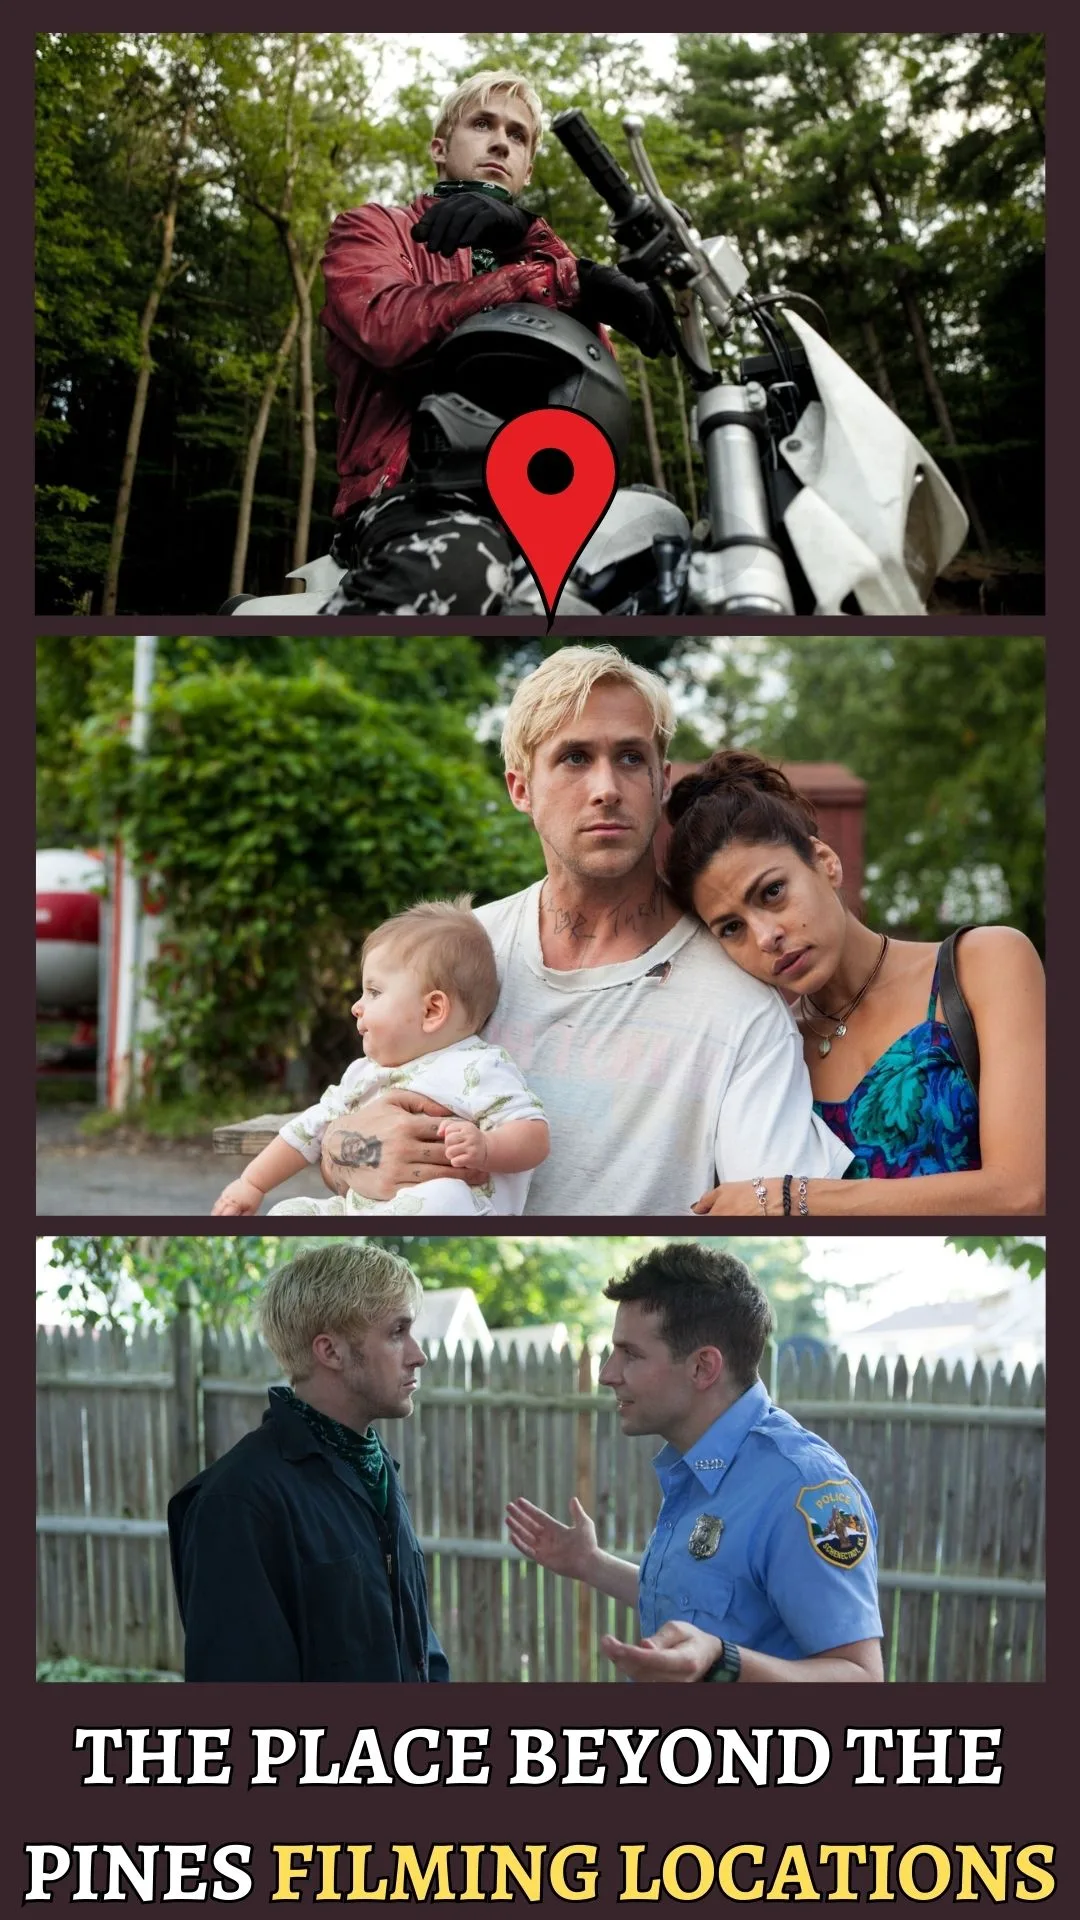 The Place Beyond the Pines Filming Locations